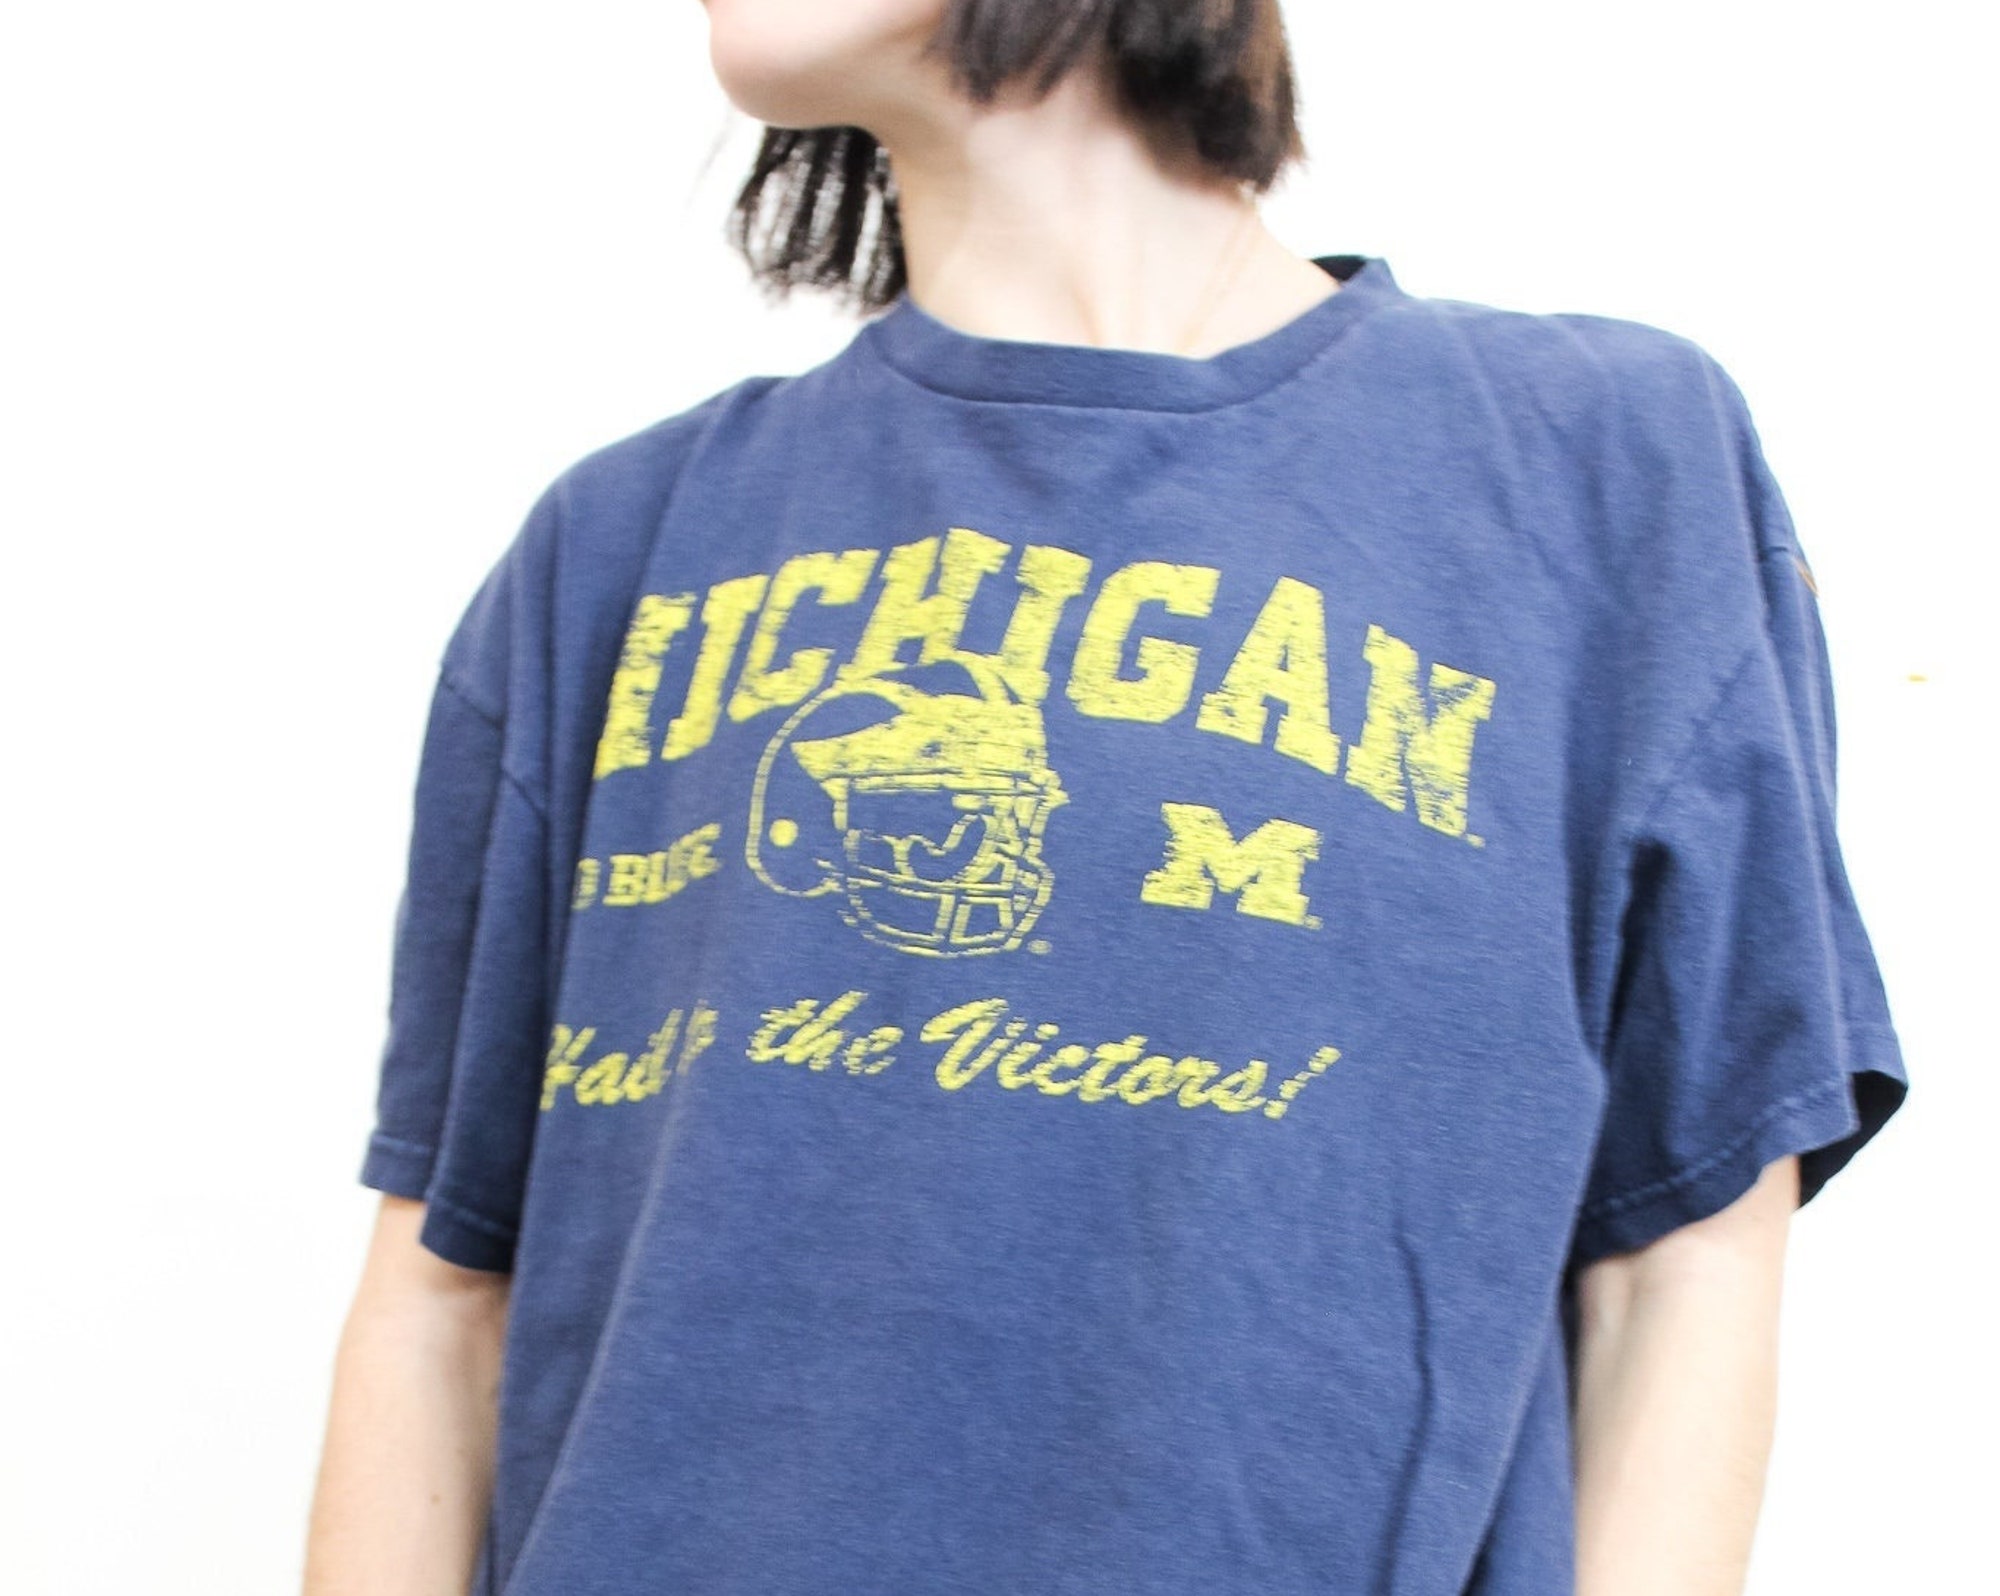 Discover University of Michigan Vintage Tee